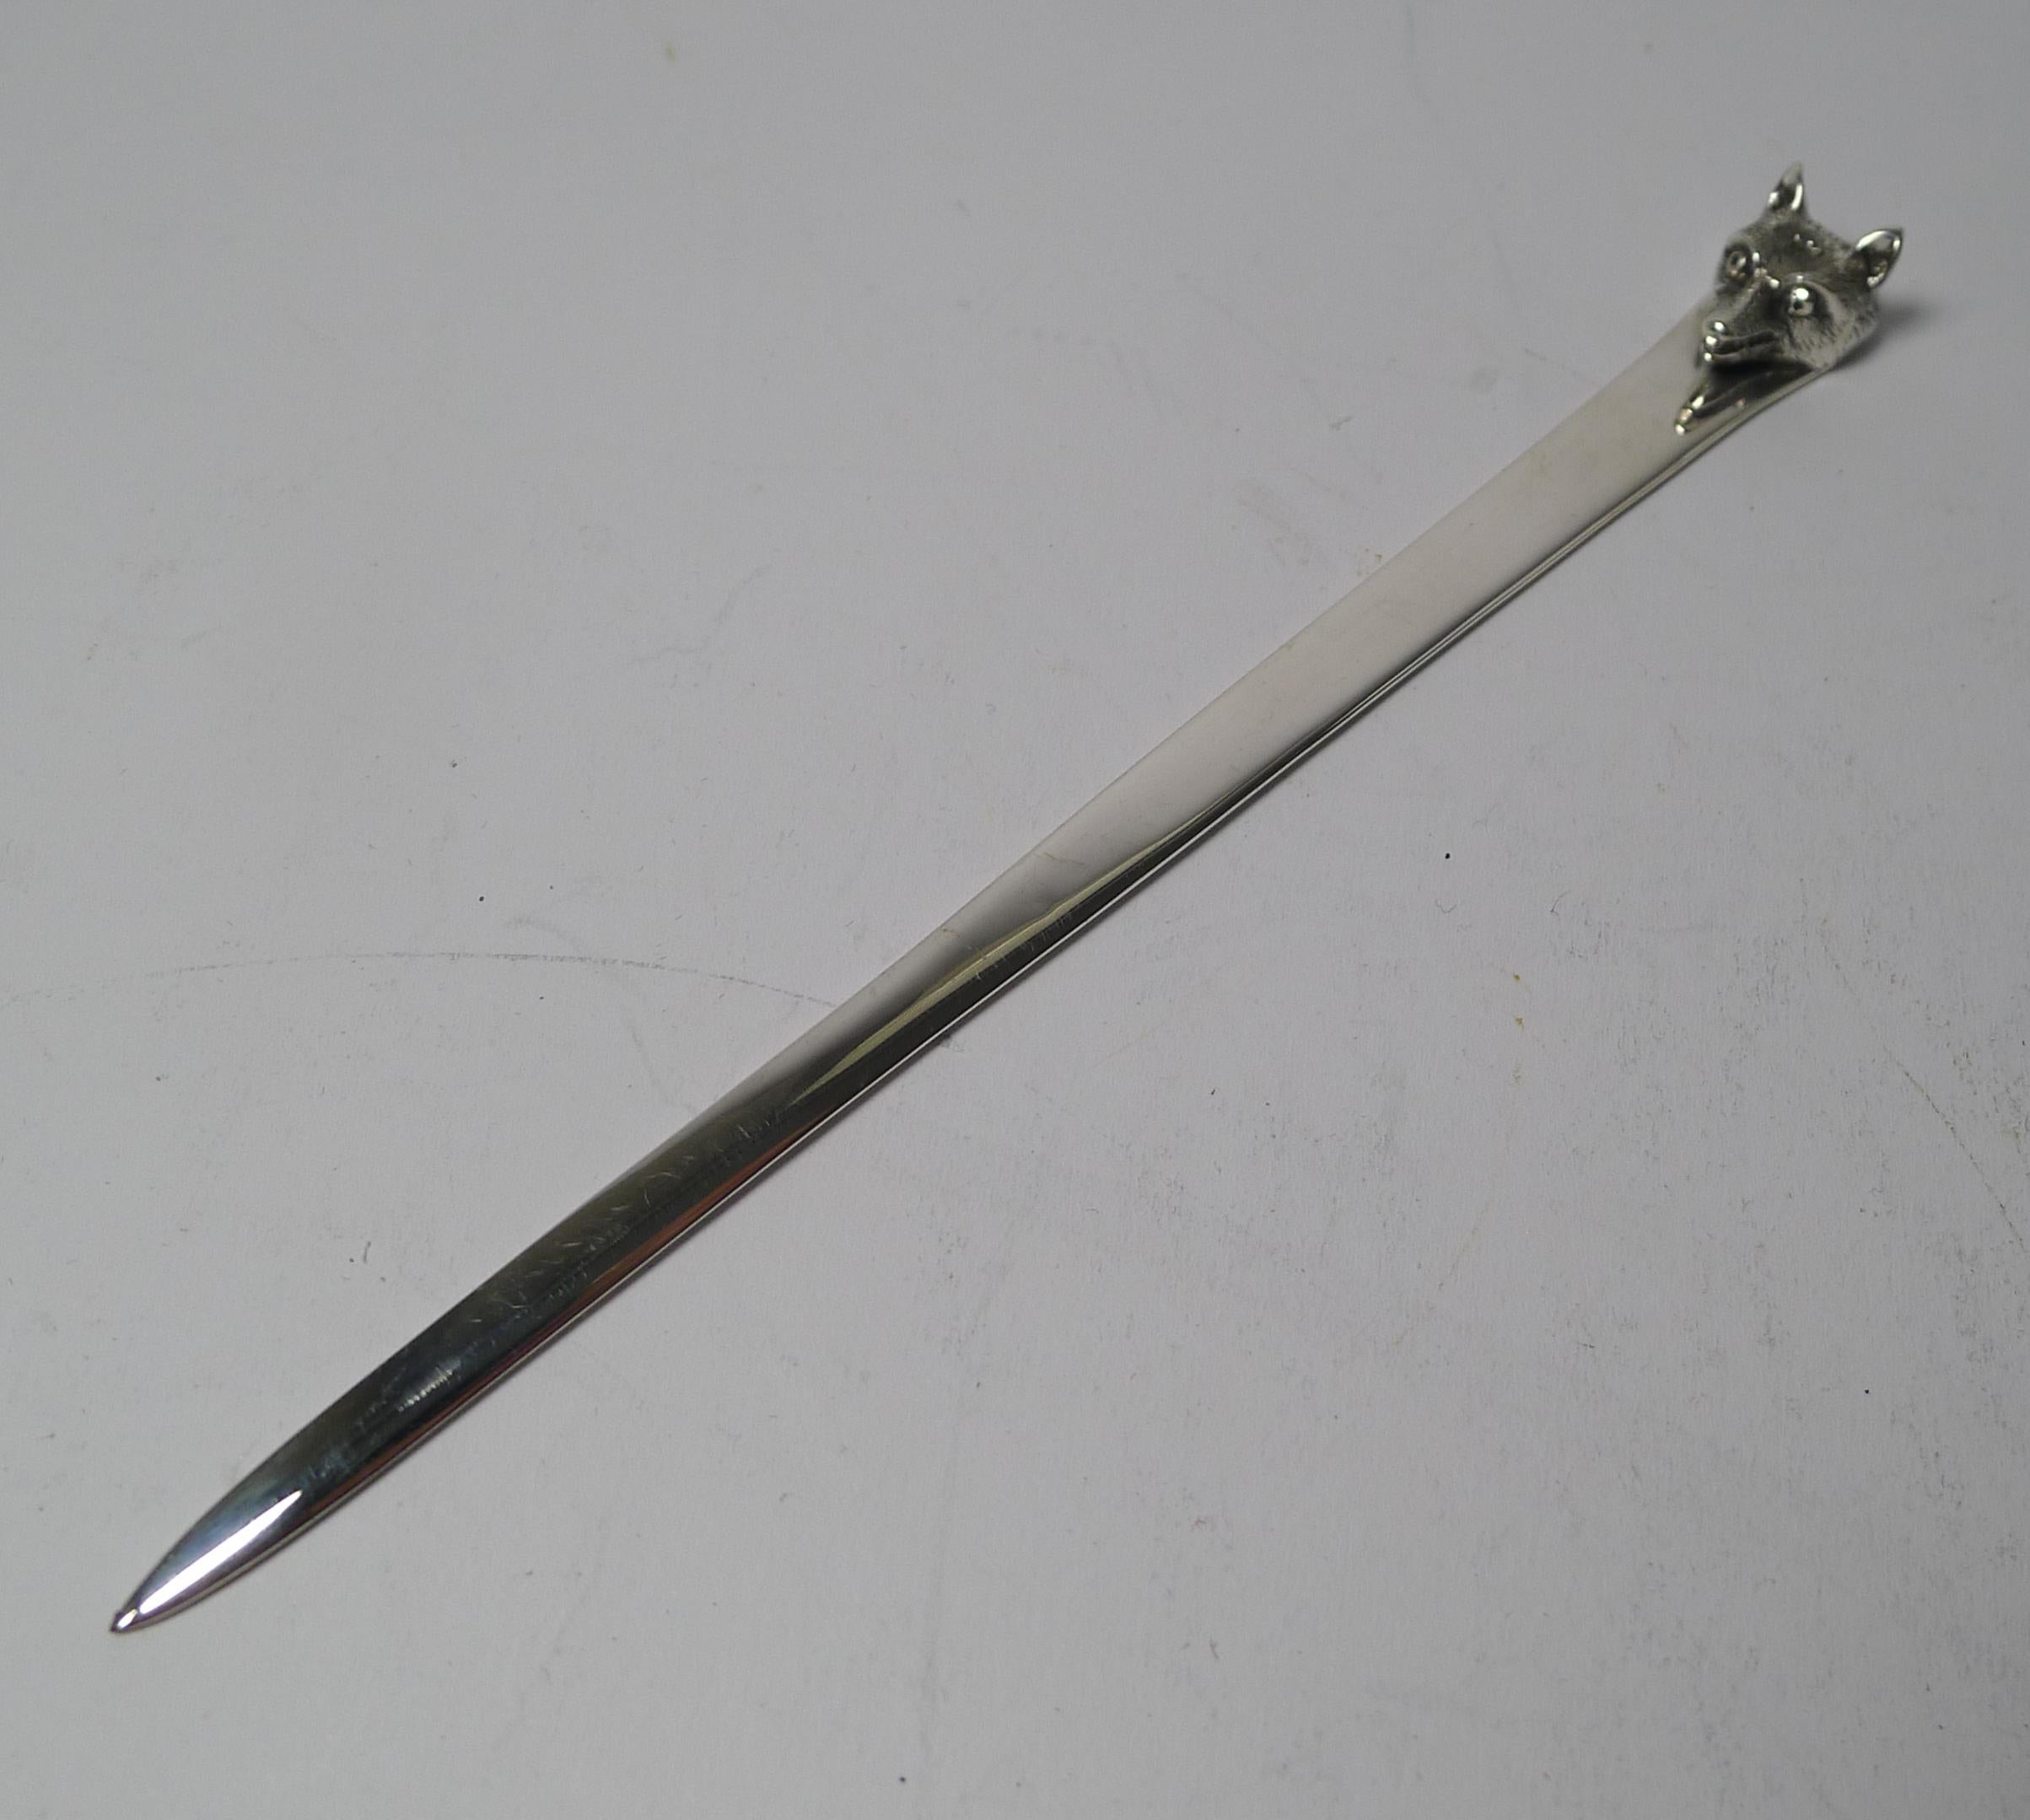 Made in the Art Deco era, this splendid solid sterling silver letter opener has a handle featuring a handsome Fox's head, always highly sought-after.

What makes this particularly collectable is that it is a period piece, nearly 100 years old and